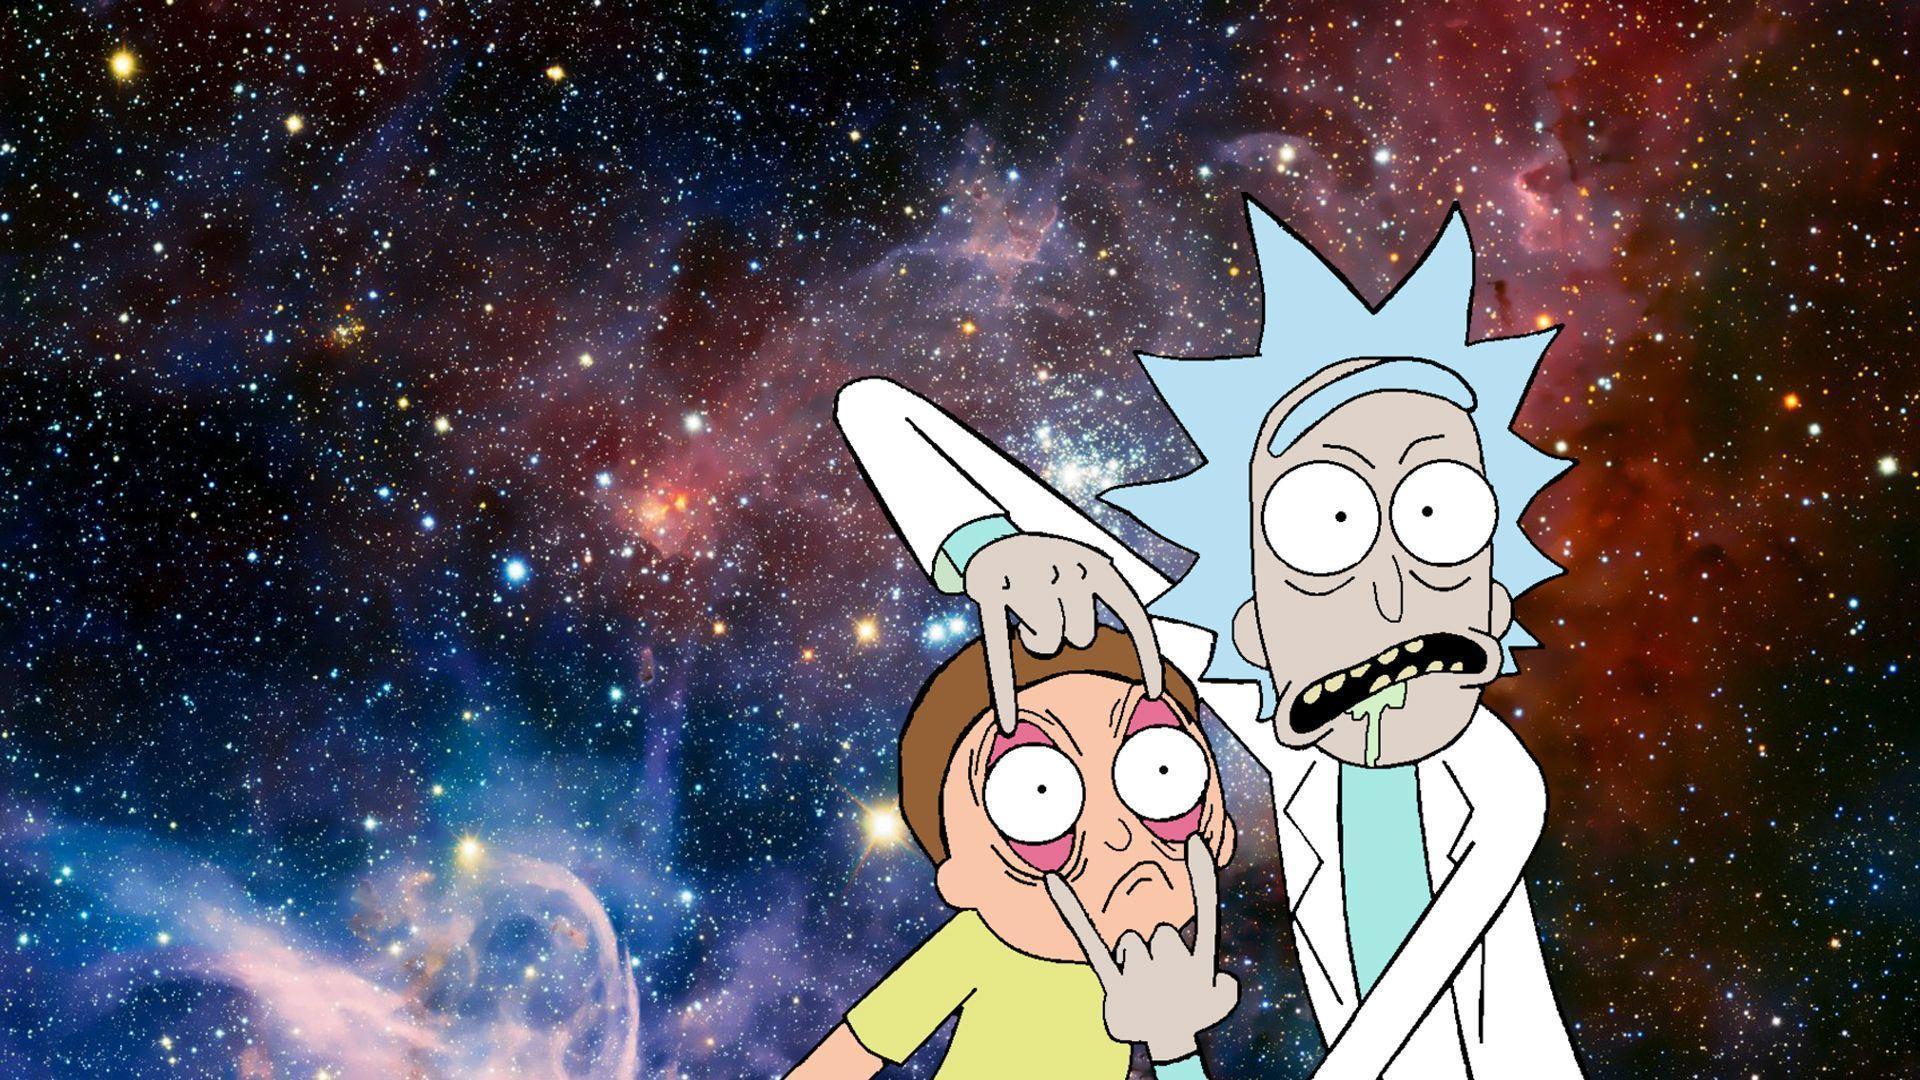 prompthunt Trippy Stoner Rick Sanchez from Rick and Morty Wallpaper Poster  Astrology Cosmos Planets Galaxies Aliens